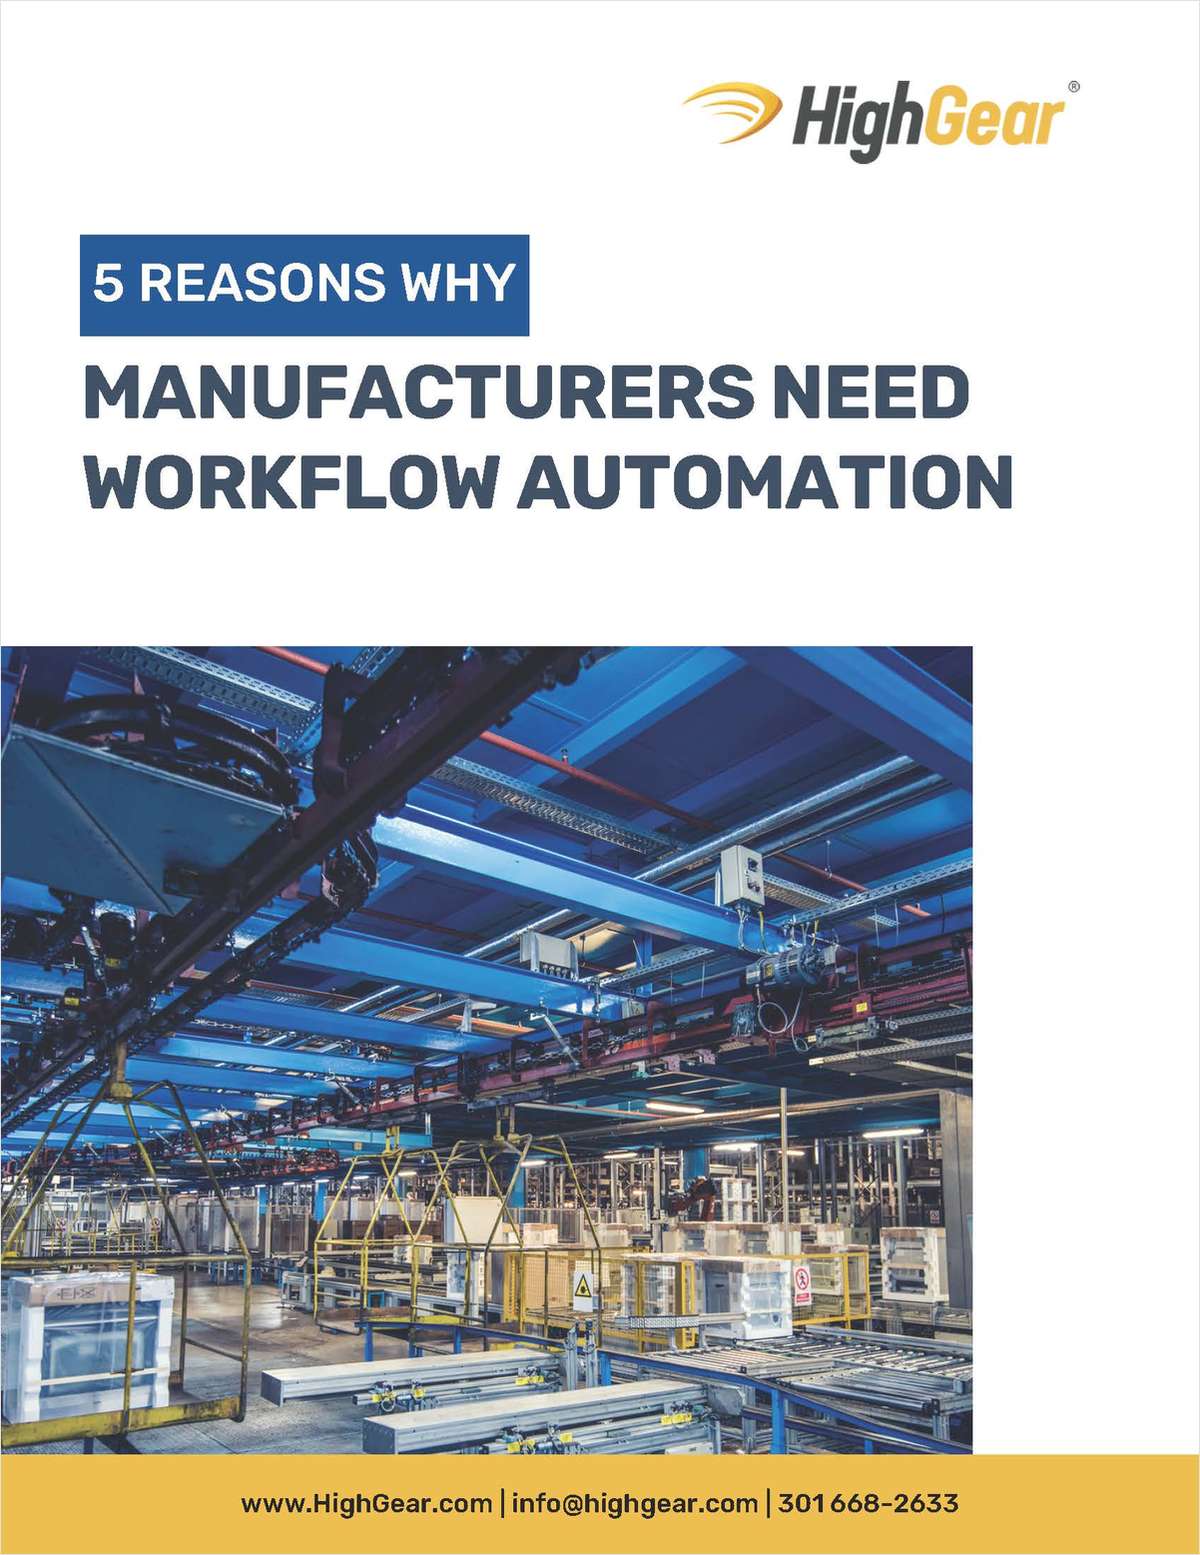 5 Reasons Manufacturers Need Workflow Automation